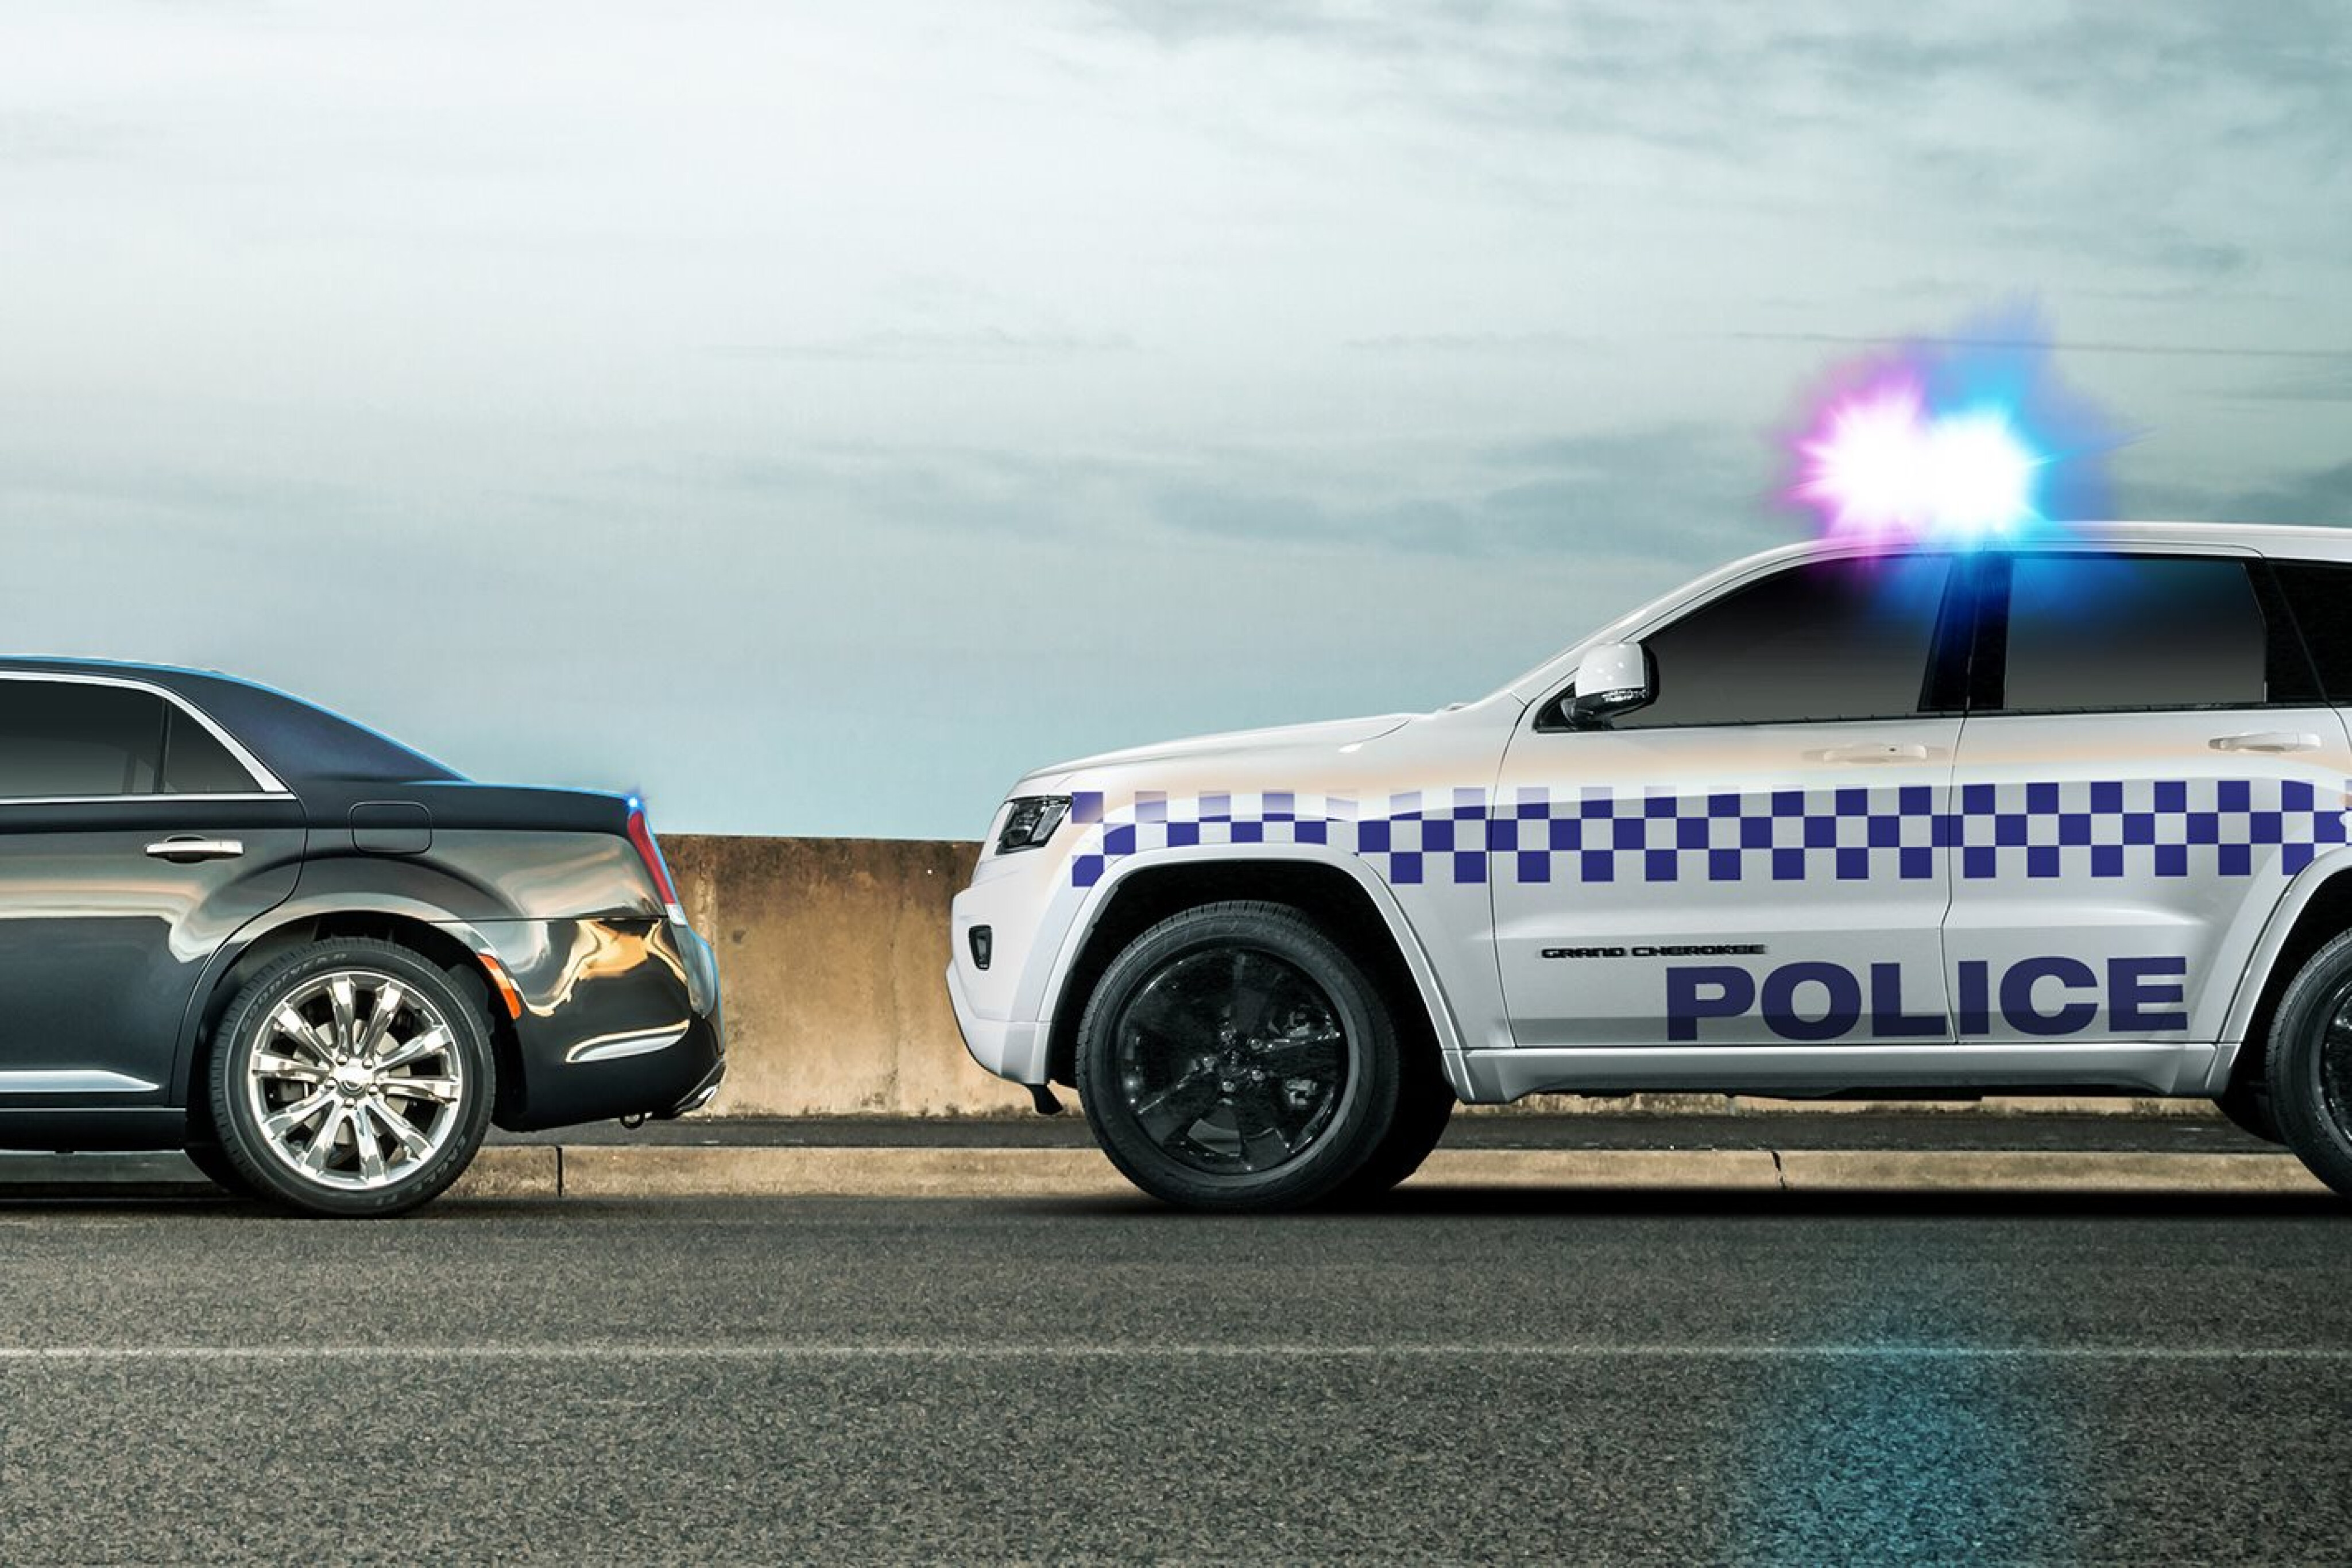 bc6d0a12/australian police could use suv highway patrol jpg